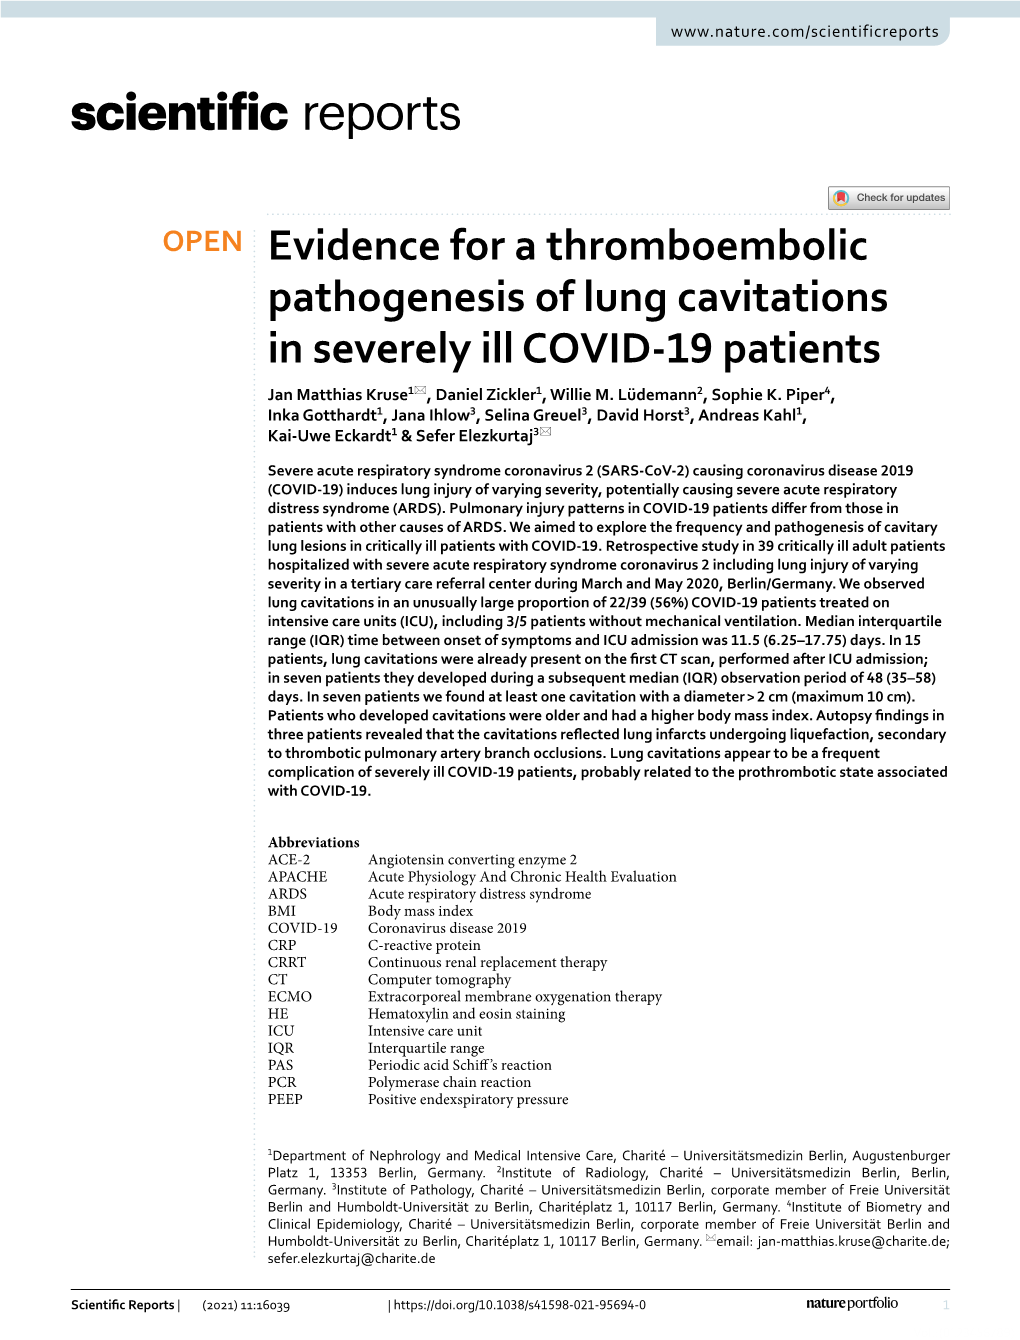 Evidence for a Thromboembolic Pathogenesis of Lung Cavitations in Severely Ill COVID-19 Patients